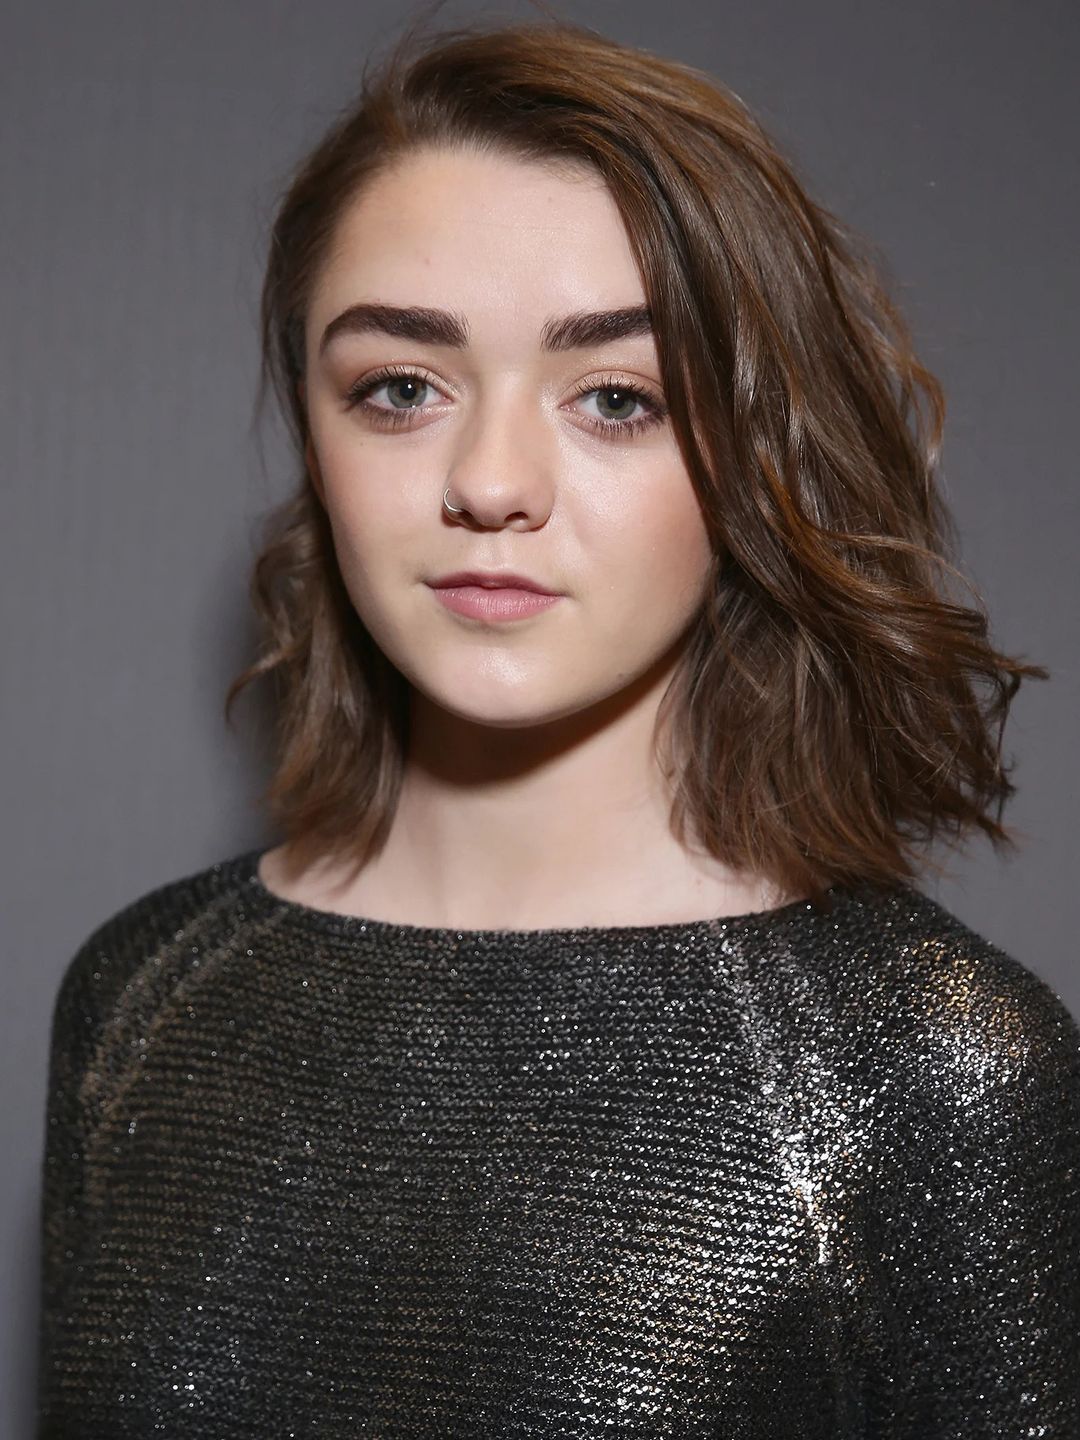 Maisie Williams place of birth